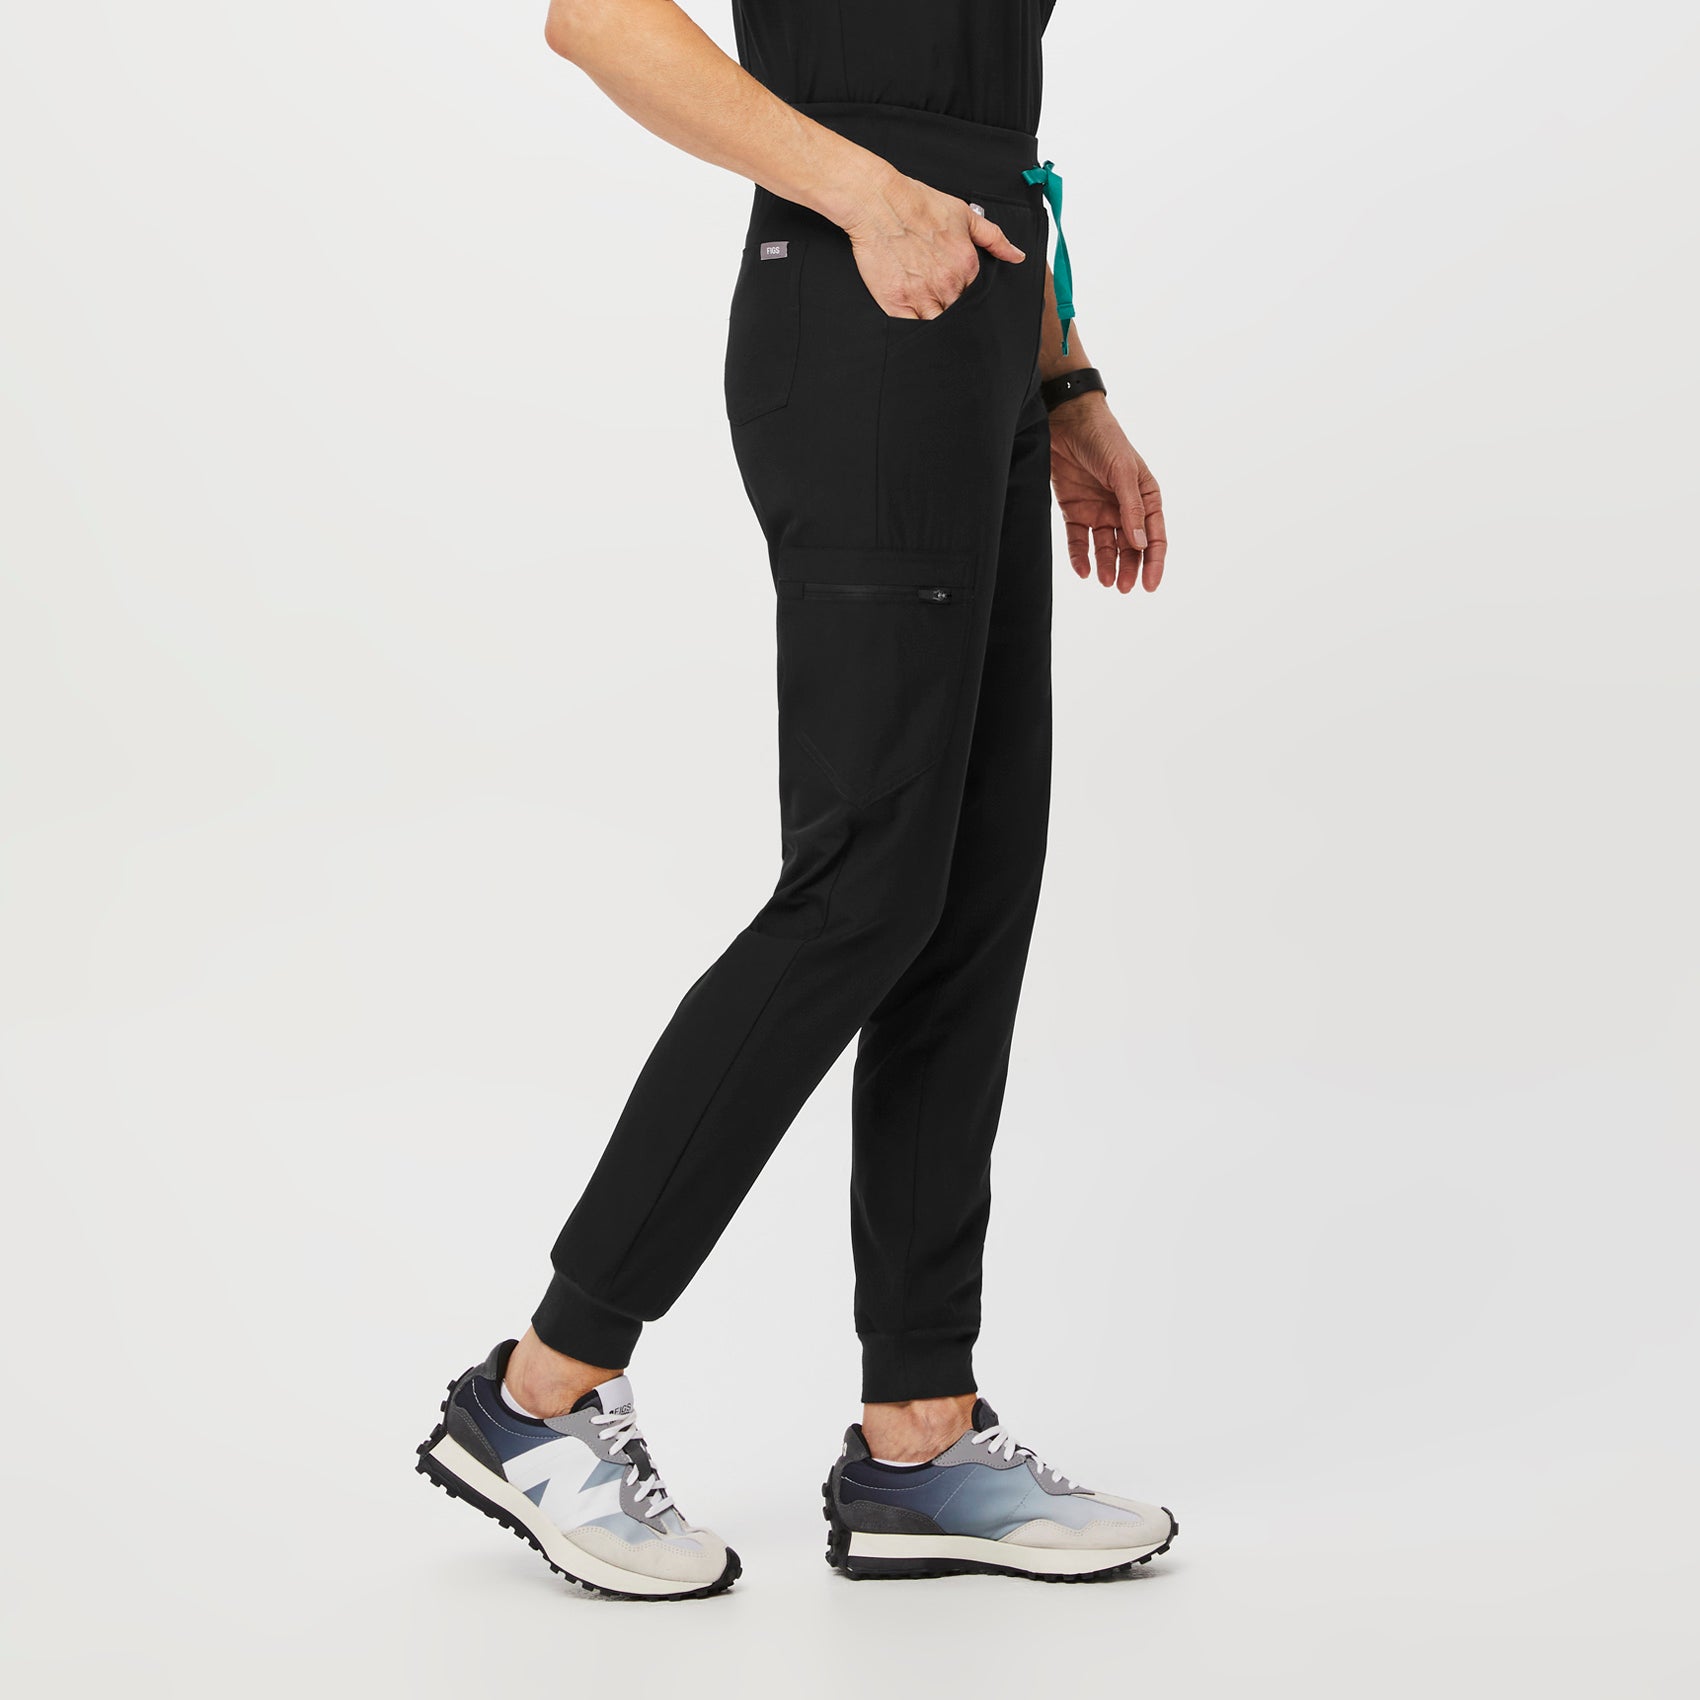 FIGS - Turns out our Zamora Jogger pant really does move quick. She's  almost SOLD out. Get yours now!